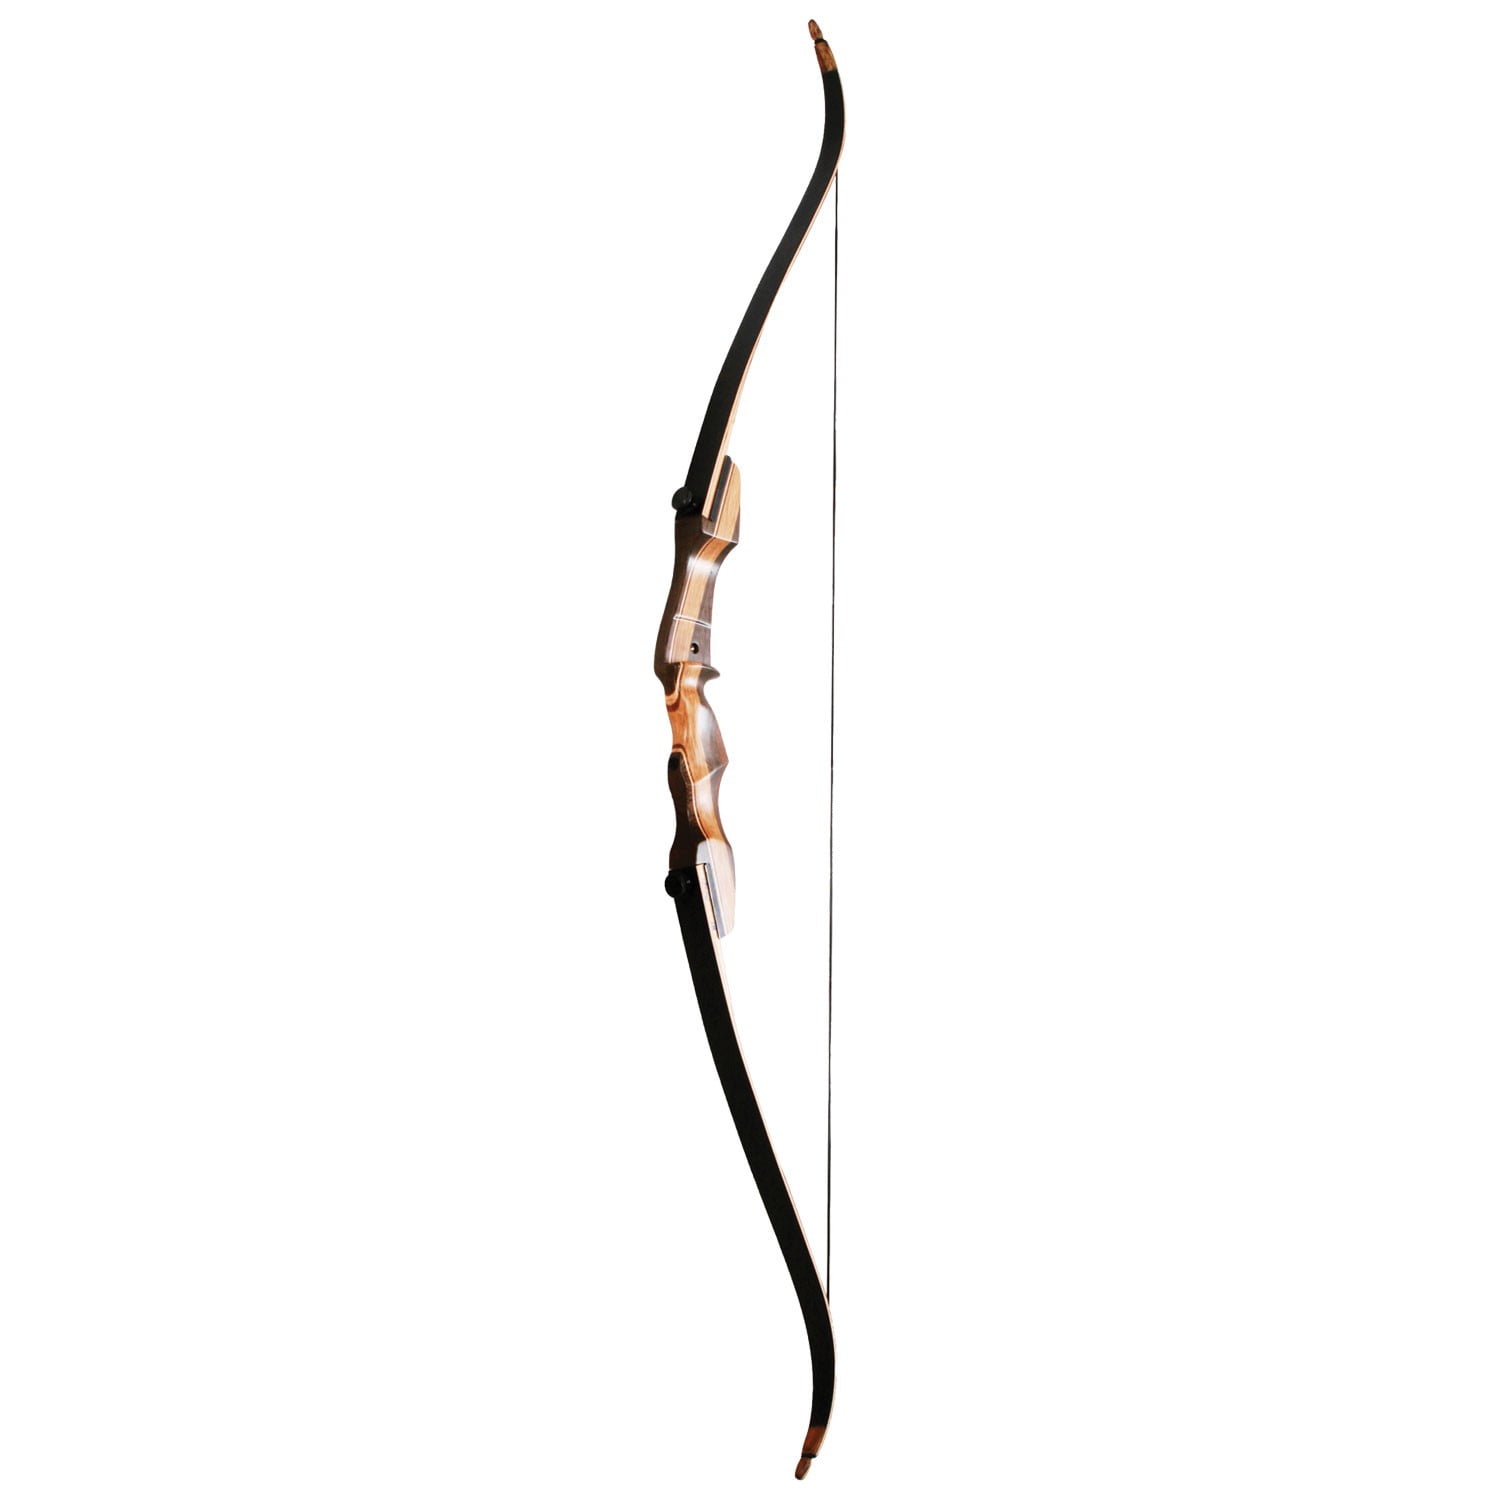 Samick Polaris 62" Take Down Recurve Bow Right Hand available in 26# and 32# LB 